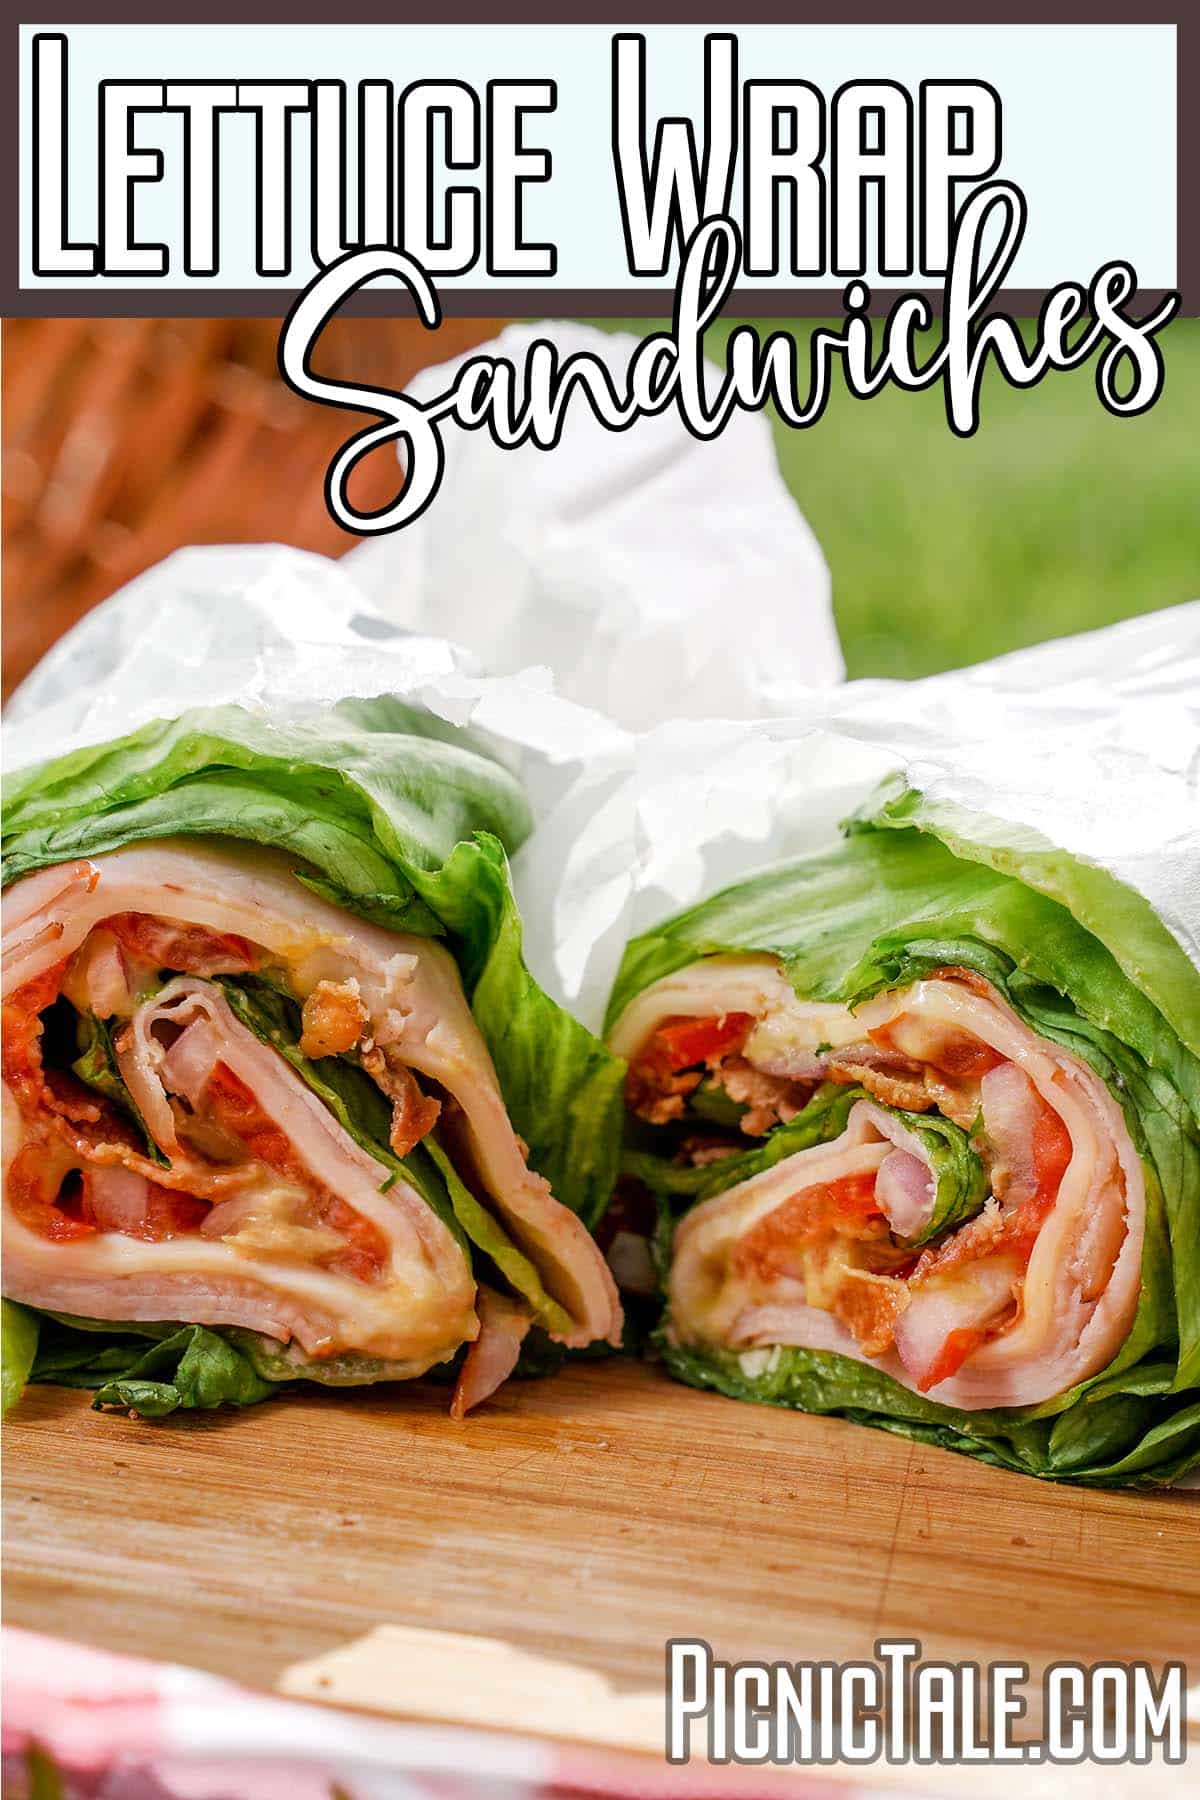 Lettuce Wrap Sandwich, with lettering on top.